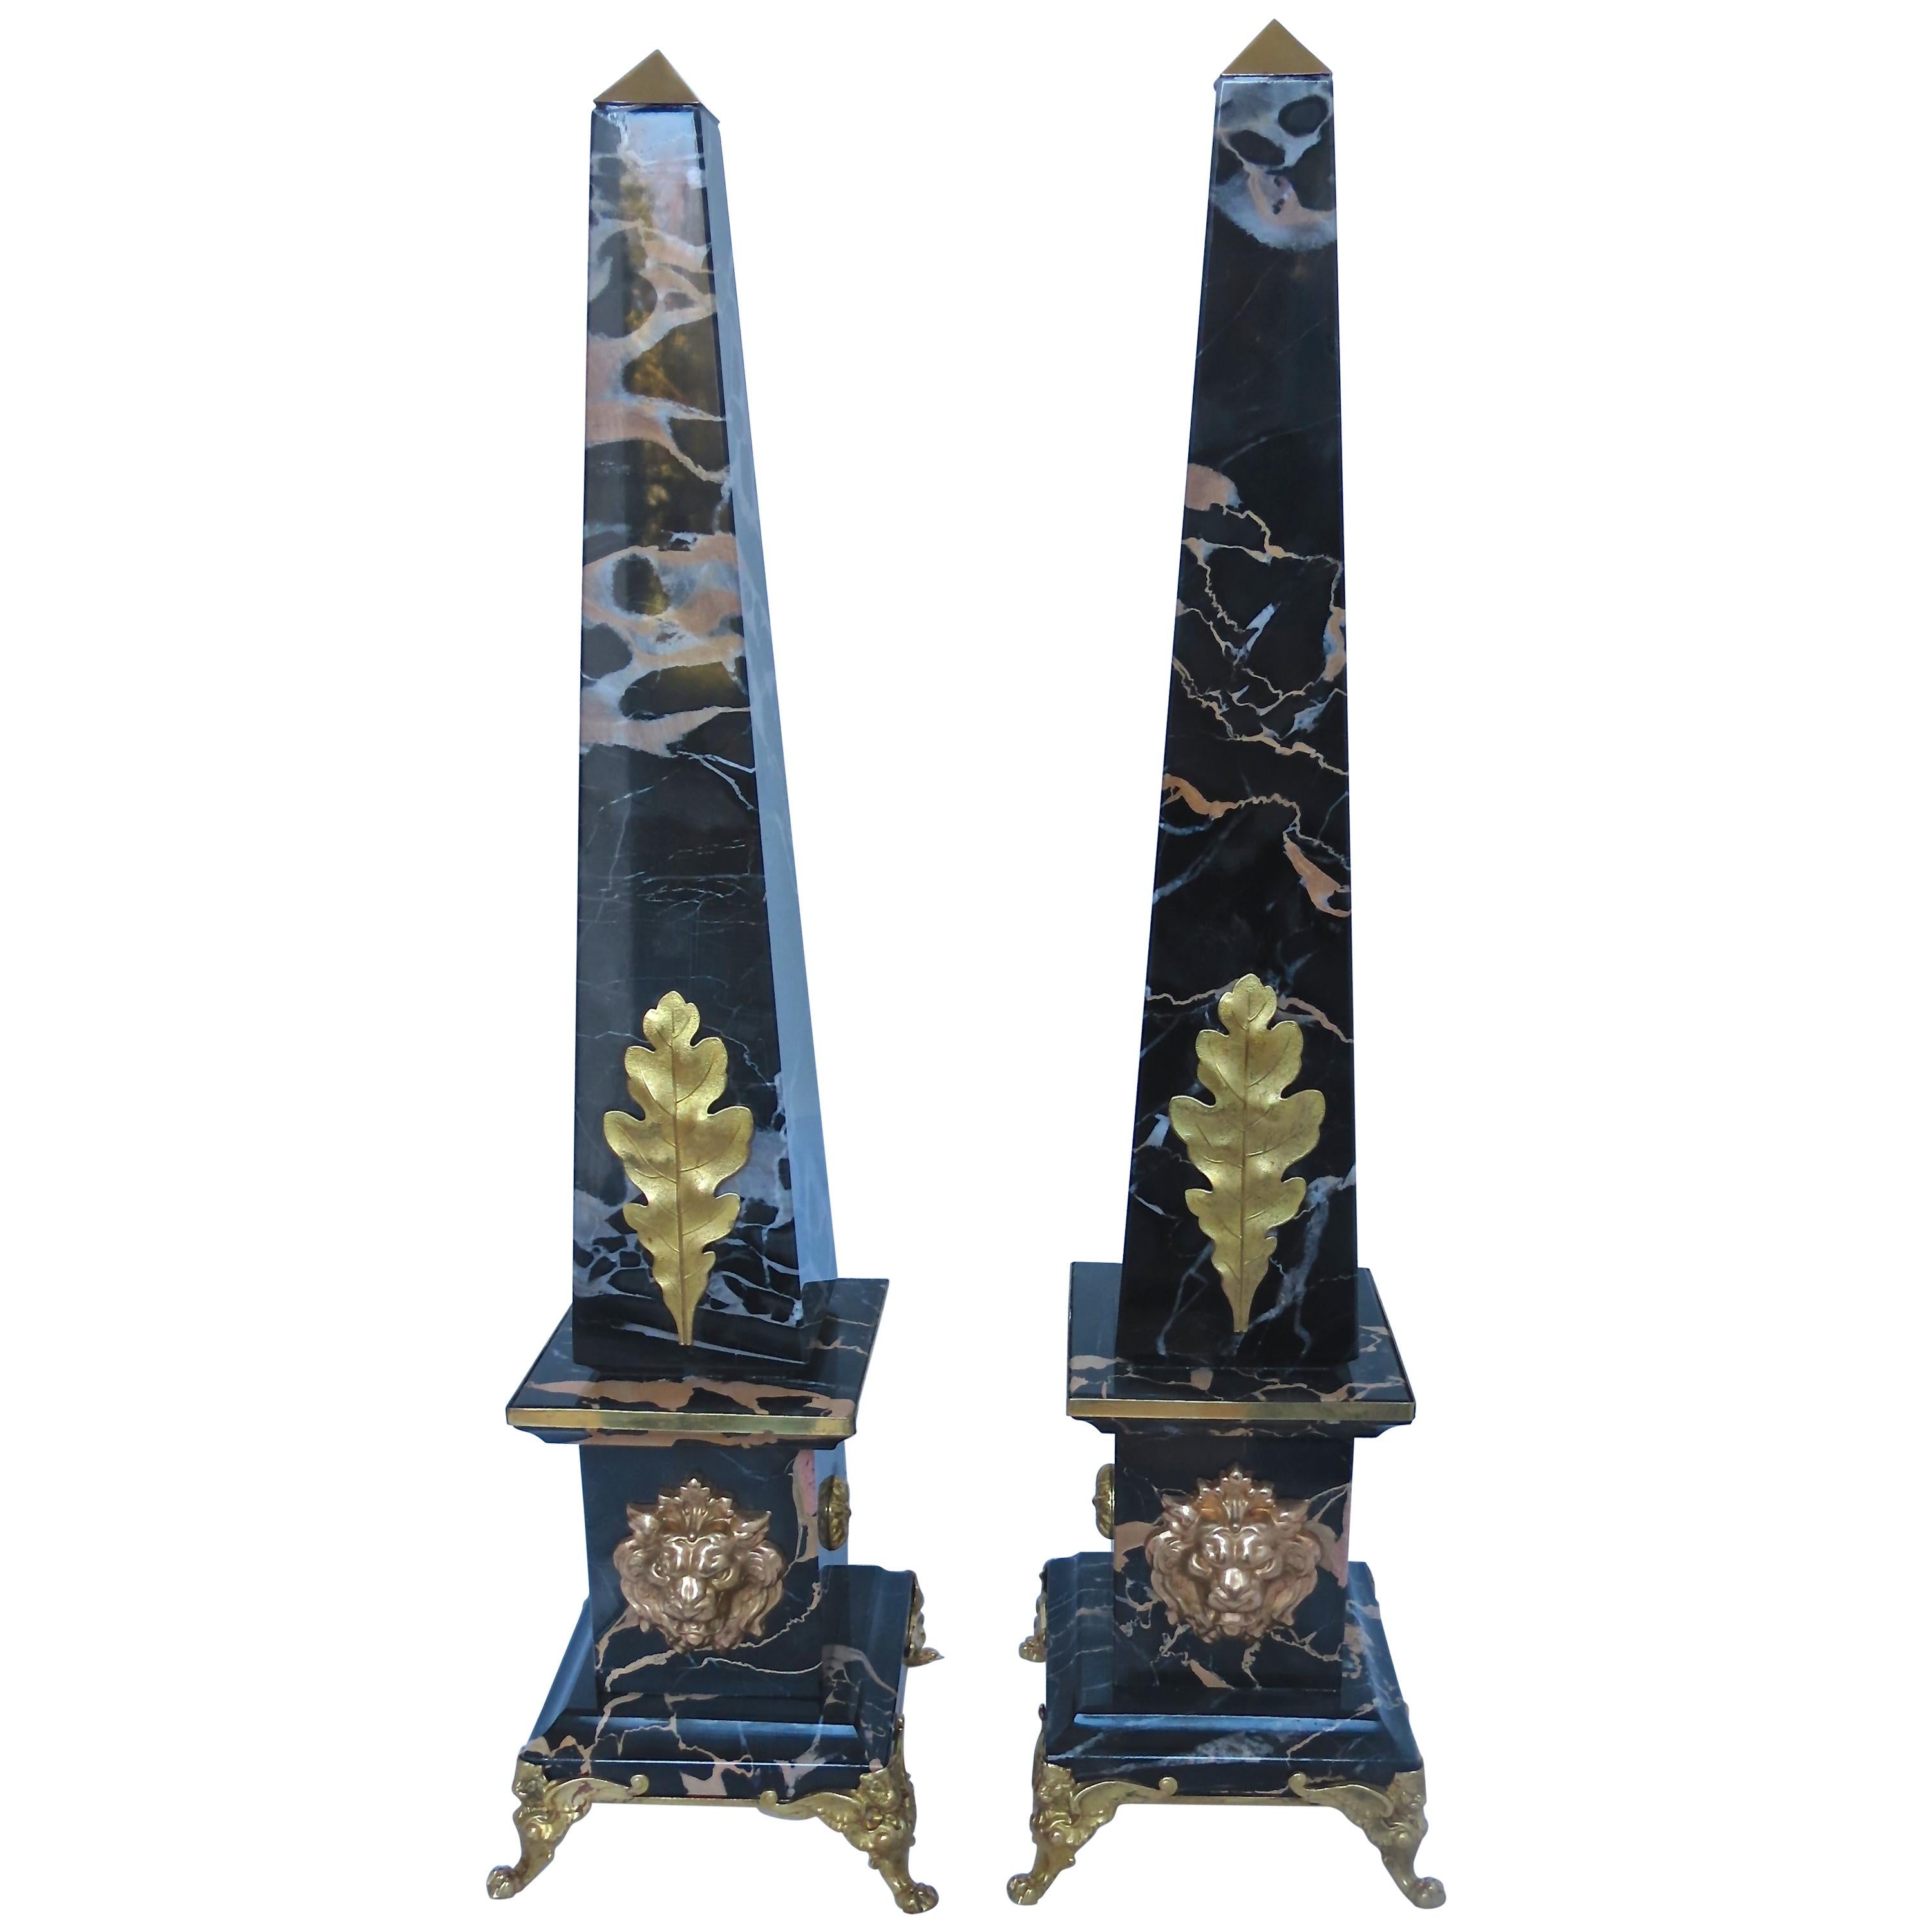 Pair of Portoro Marble and Bronze Obelisks "Gold Lion", Limited Edition, 2018 For Sale